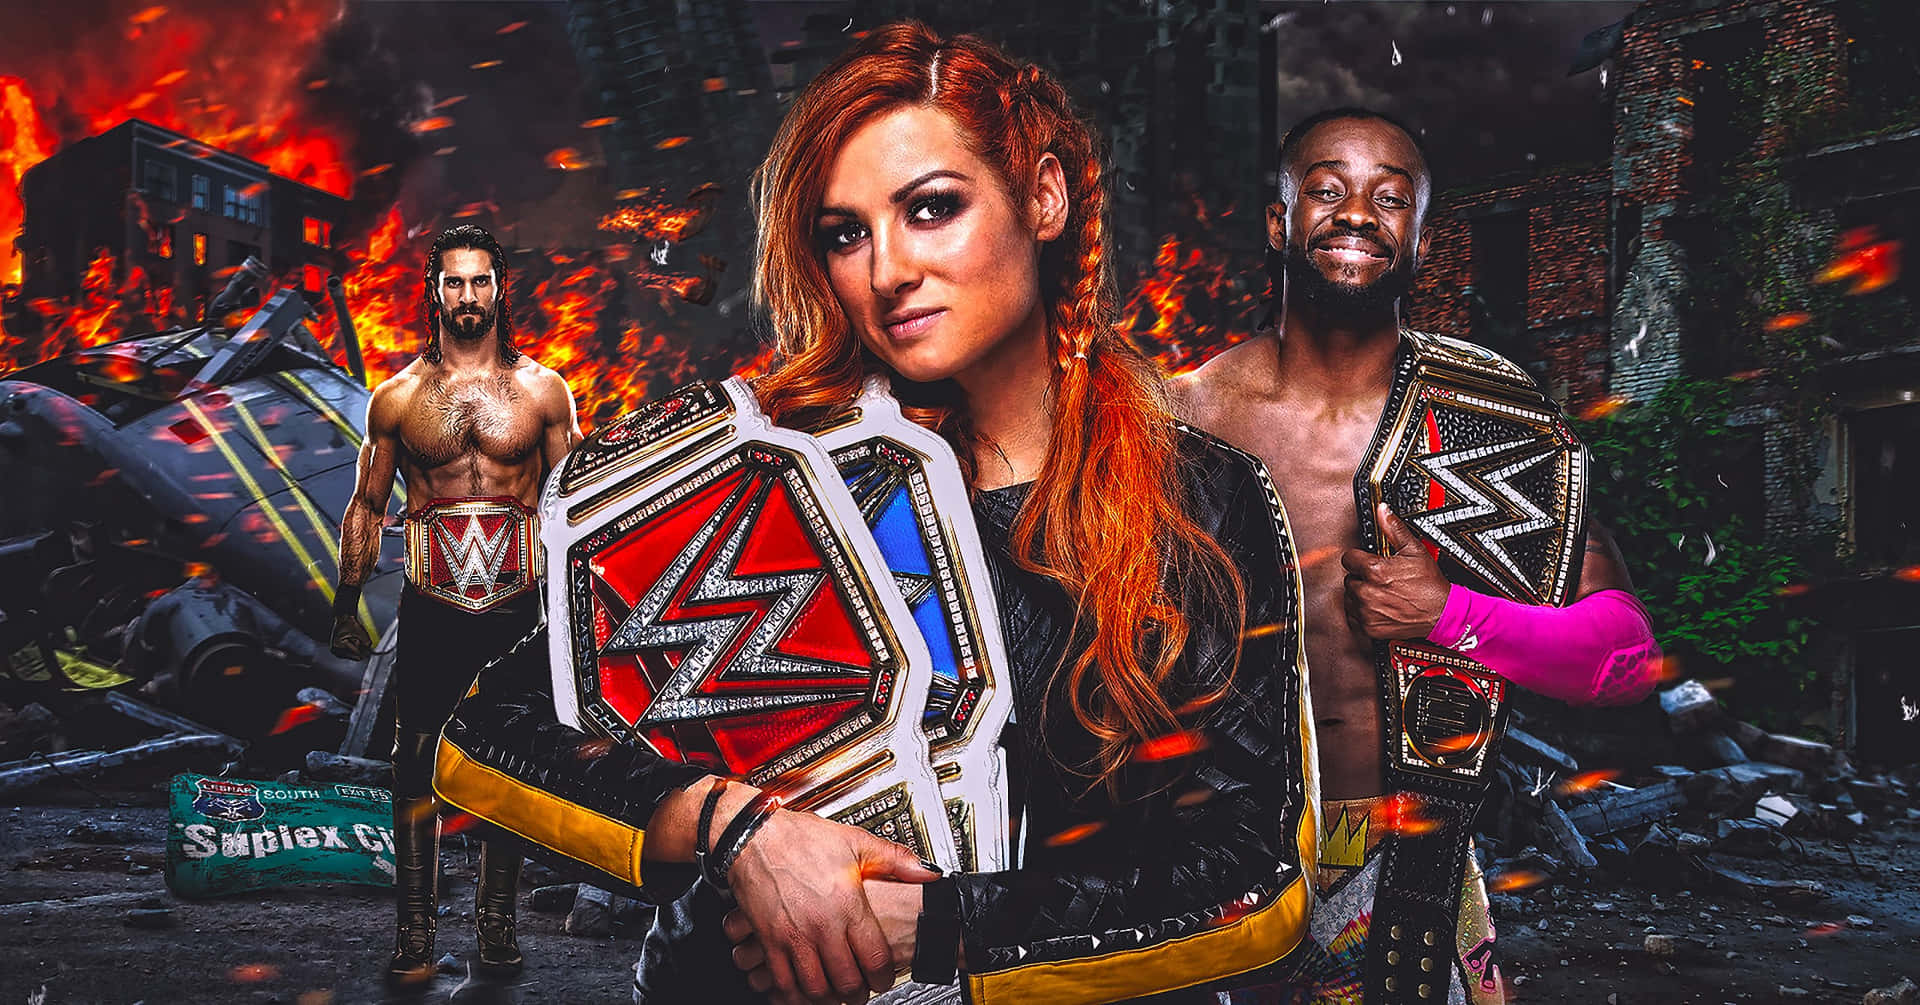 "Not Afraid to Take the Lead - Becky Lynch" Wallpaper